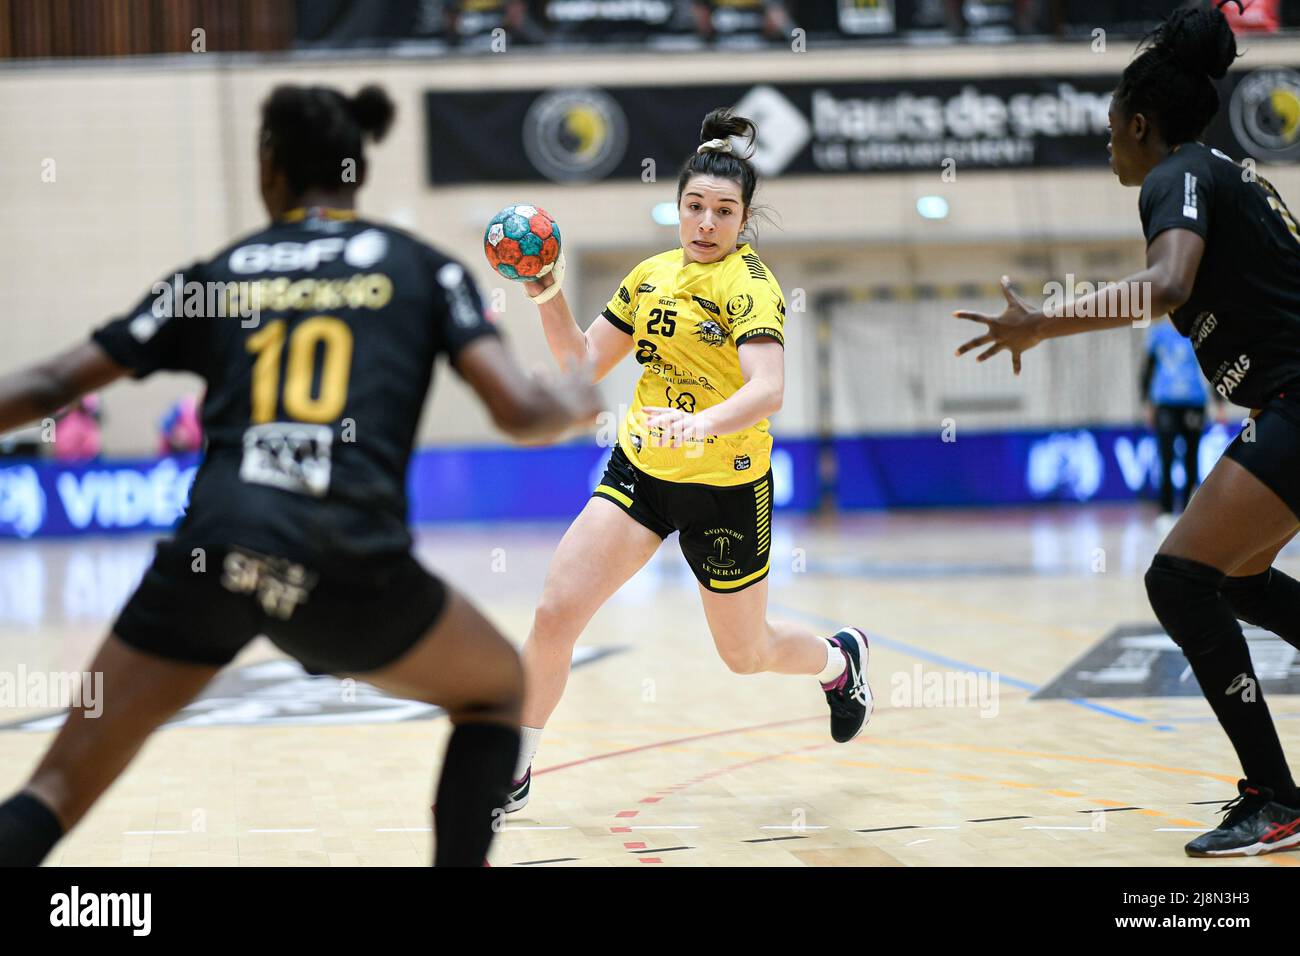 Meissa Maurice of Handball Plan de Cuques during the Women's French championship, Ligue Butagaz Energie Handball match between Paris 92 and Handball Plan de Cuques on May 8, 2022 at Palais des Sports Robert Charpentier in Issy-les-Moulineaux, France. Photo by Victor Joly/ABACAPRESS.COM Stock Photo